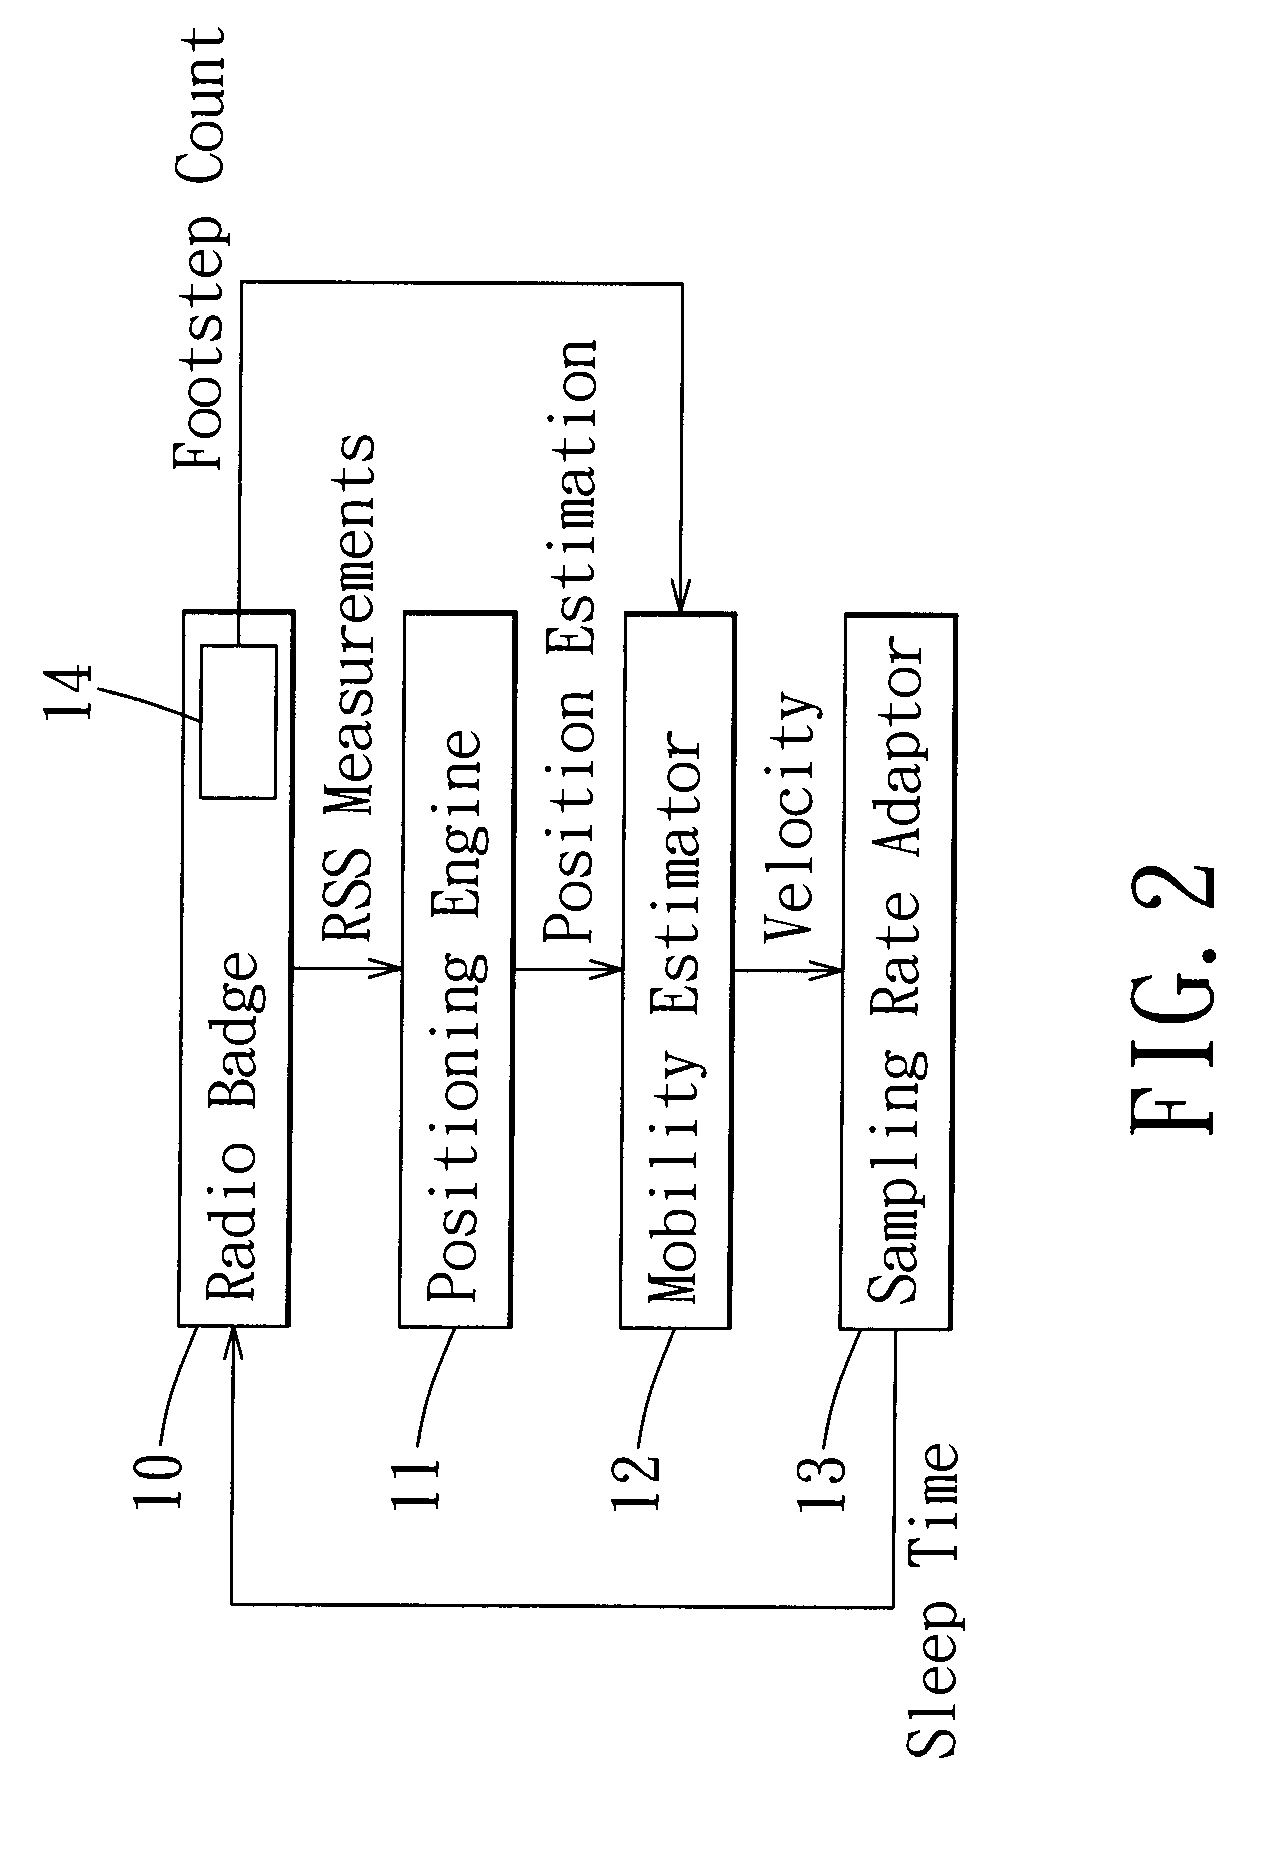 Energy-efficient indoor localization system and a method of reducing power consumption of a radio badge in the indoor localization system